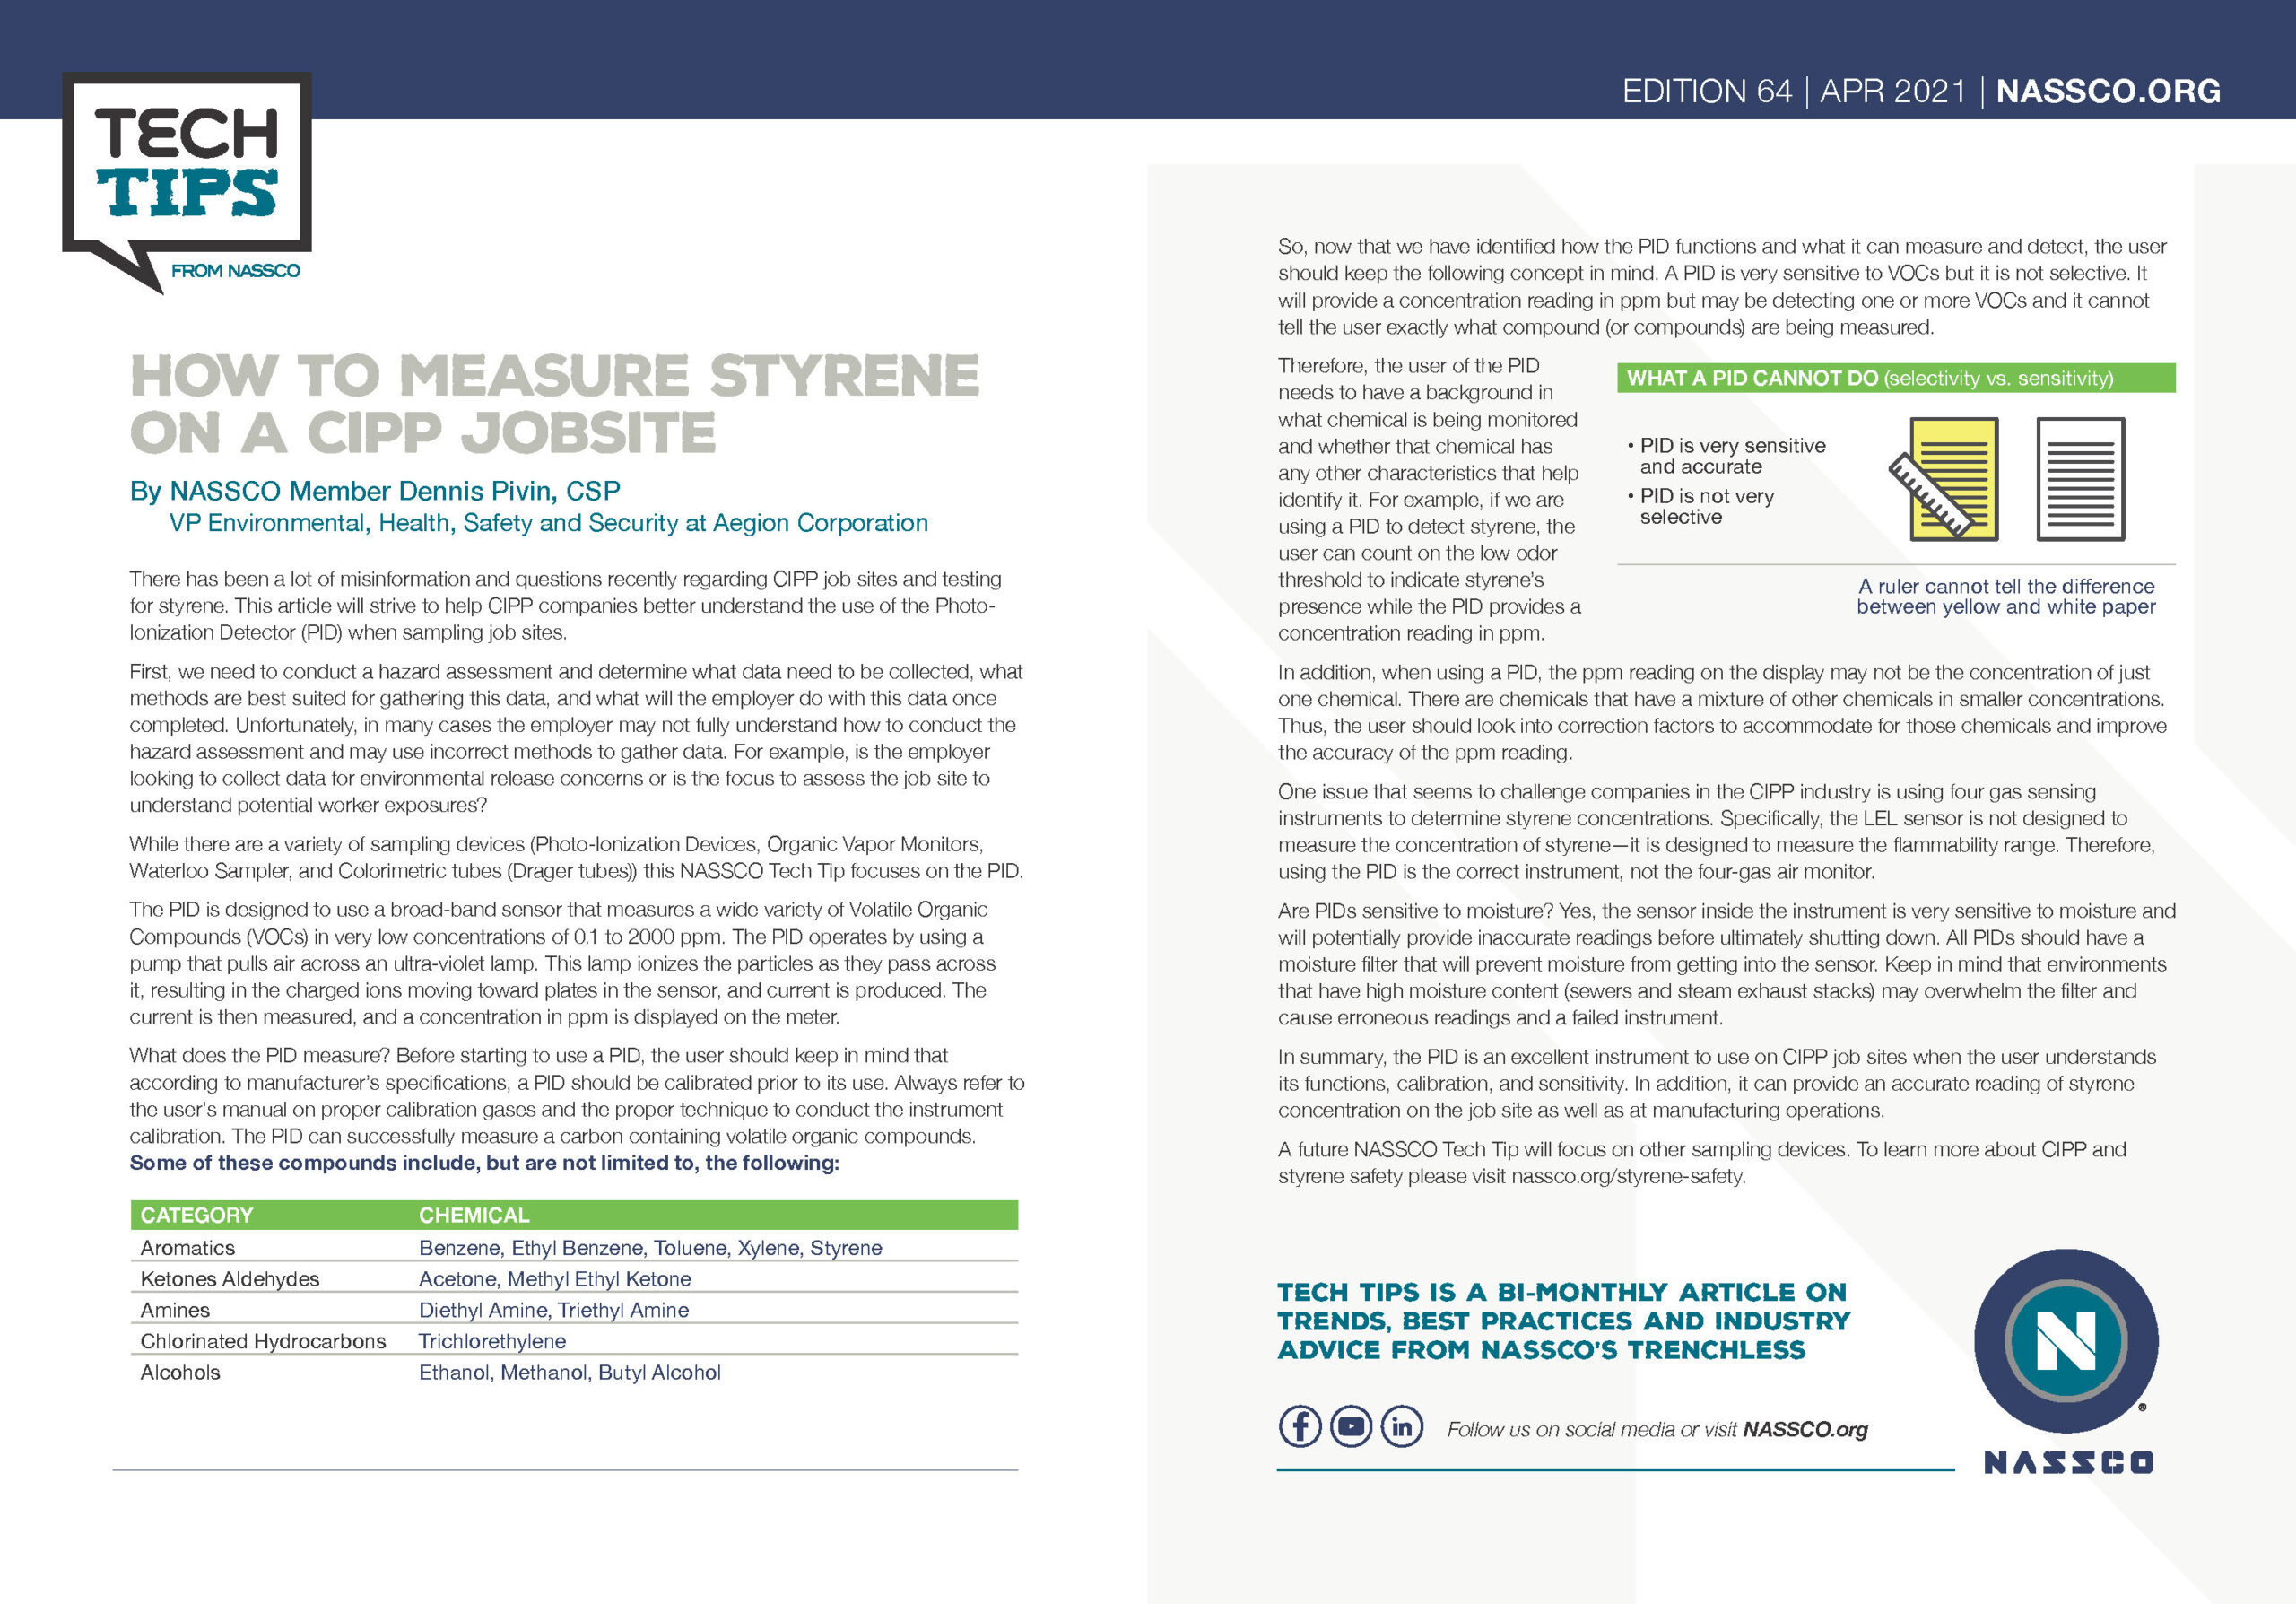 HOW TO MEASURE STYRENE ON A CIPP JOBSITE